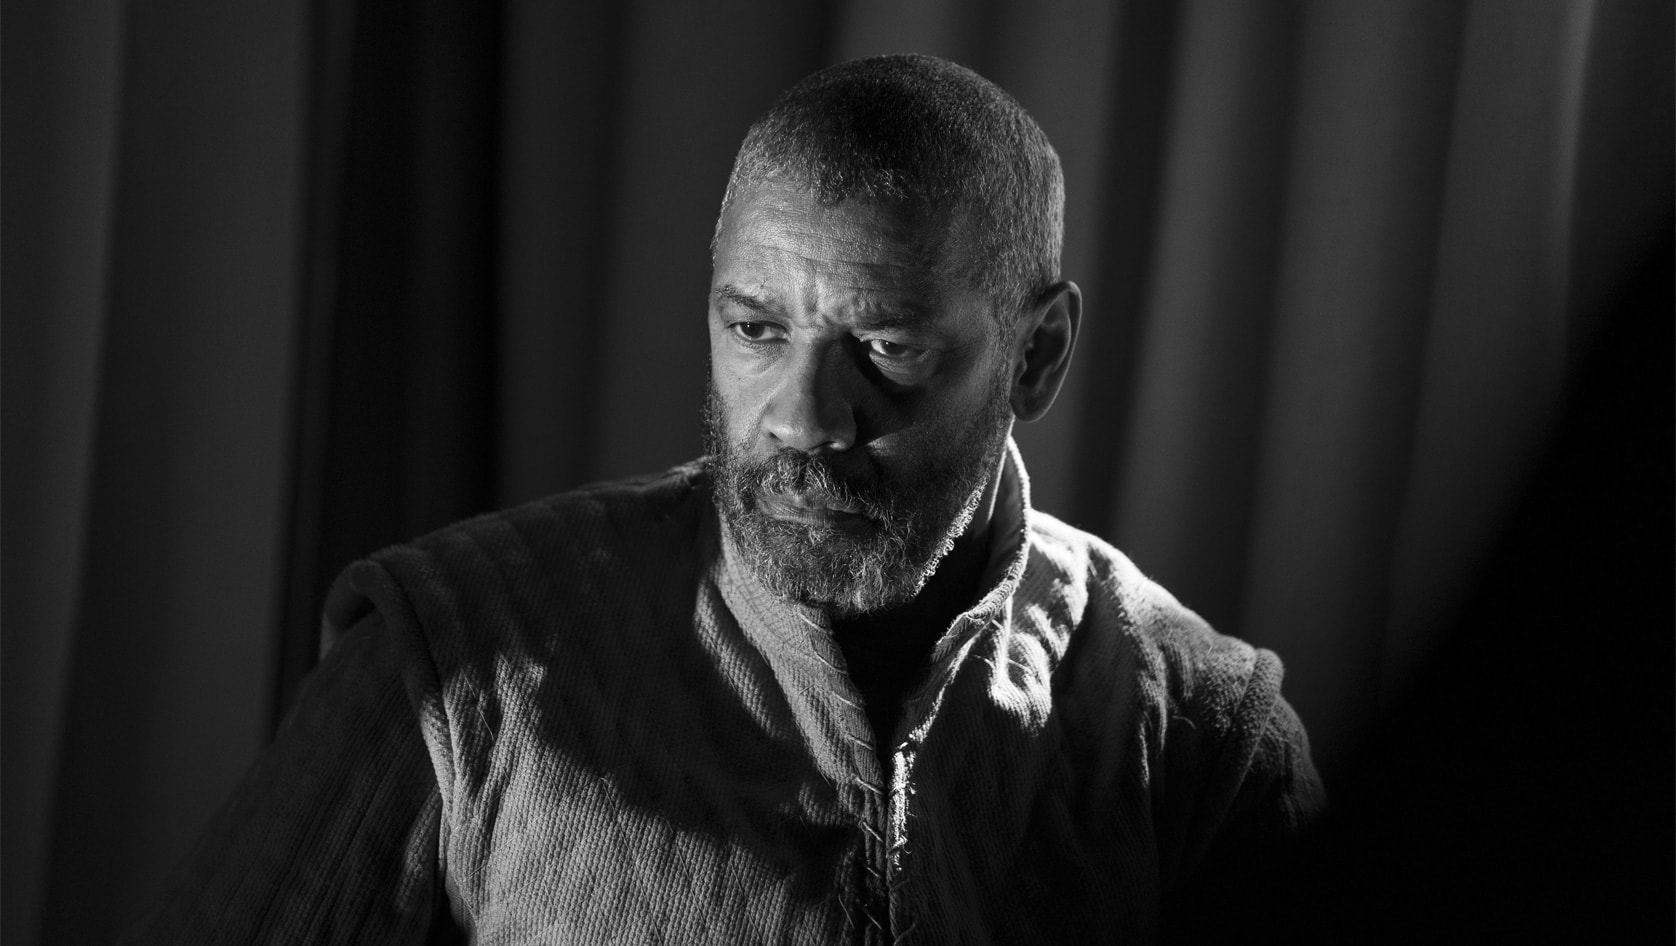 Denzel Washington stares to the side pensively as Macbeth in The Tragedy of Macbeth (Apple TV+ Press)